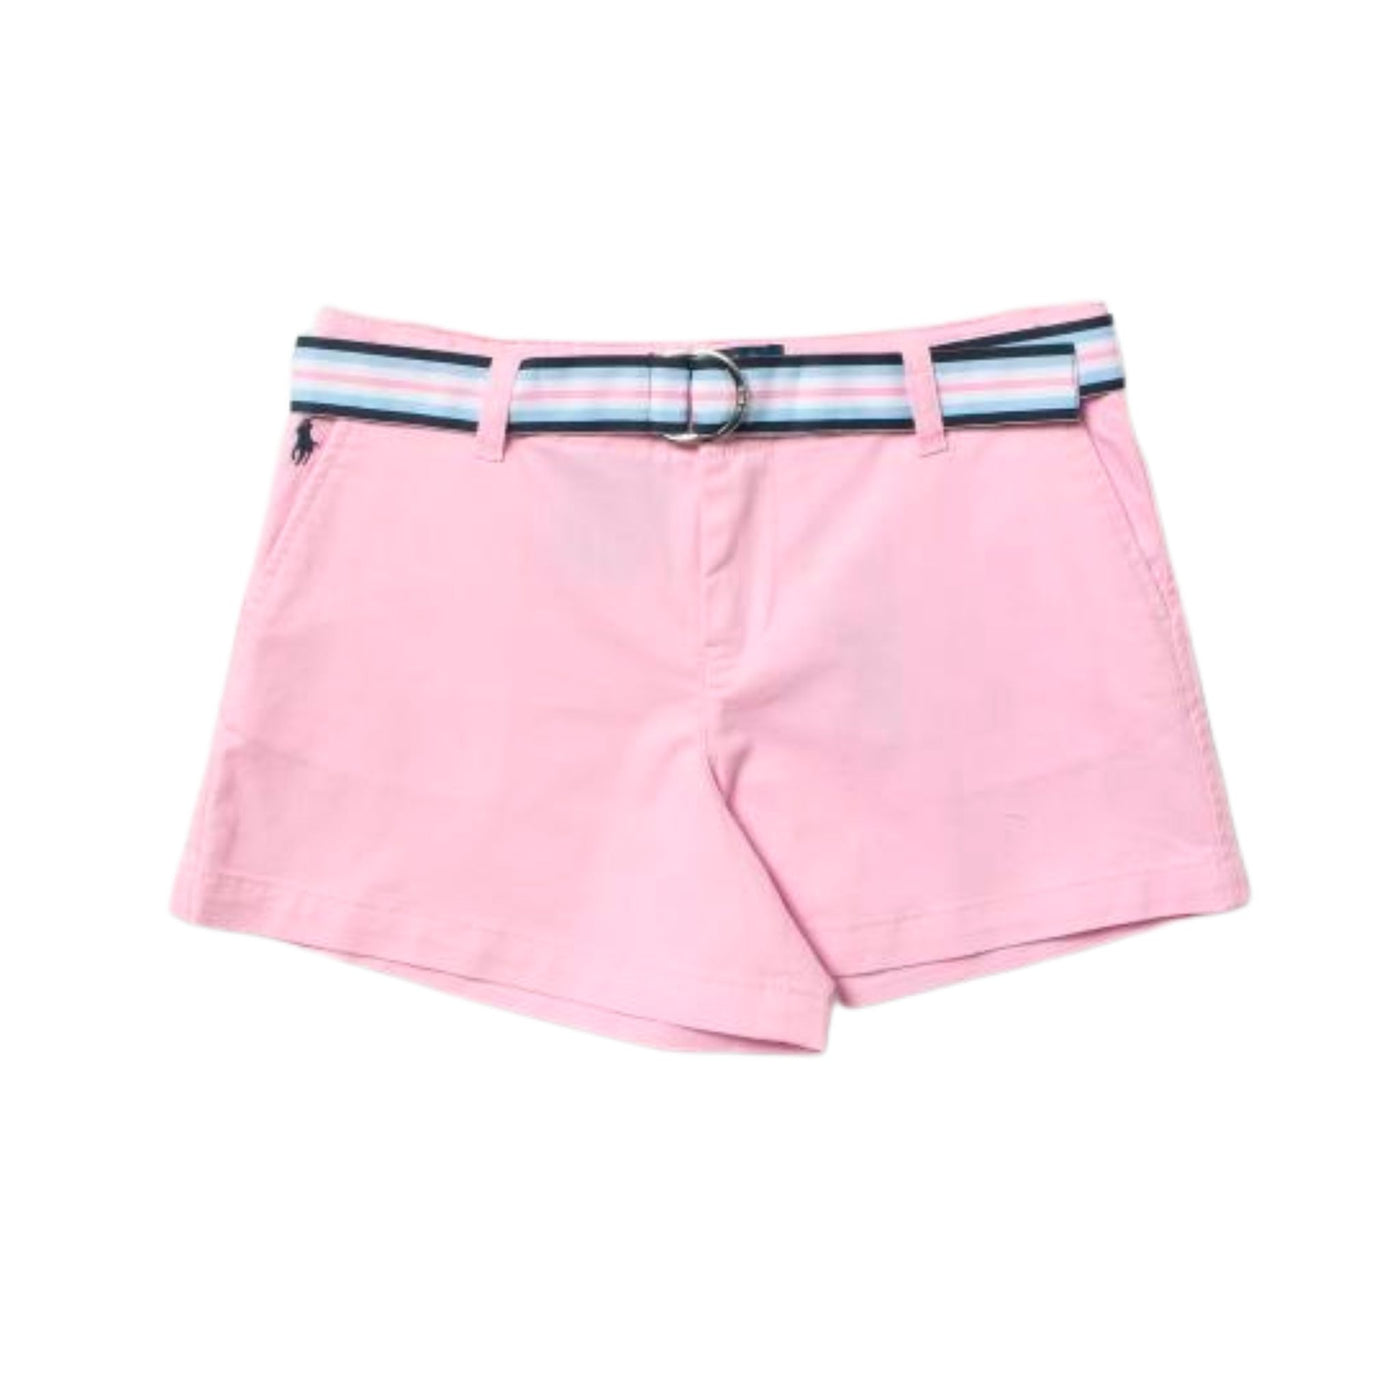 Bermuda for girls 5-7 years with multicolor belt